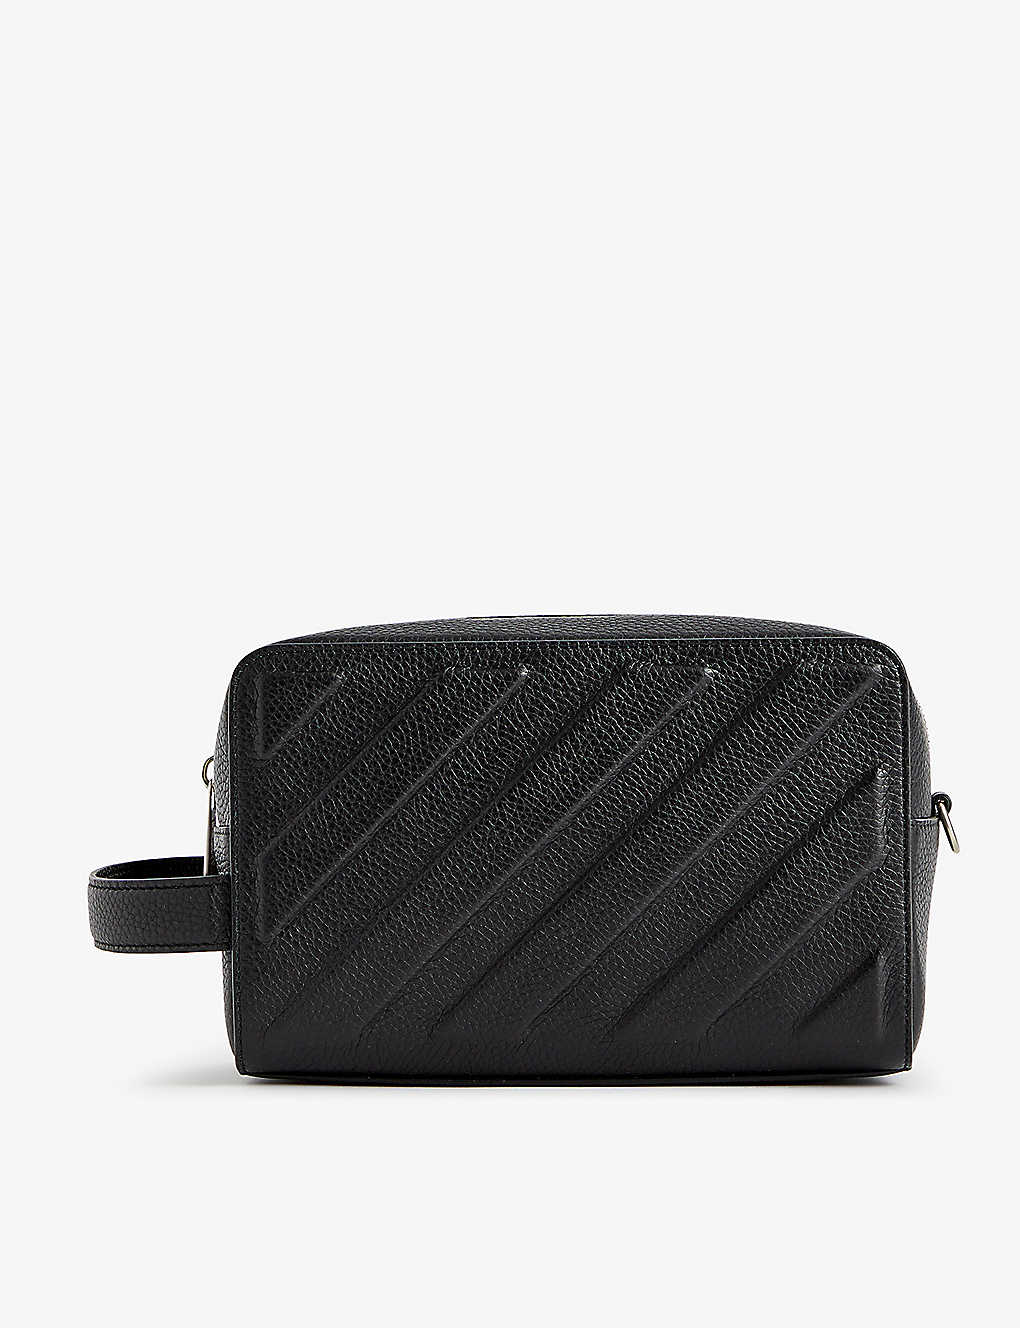 Off-white Offwhite Black No Color Diag Leather Pouch